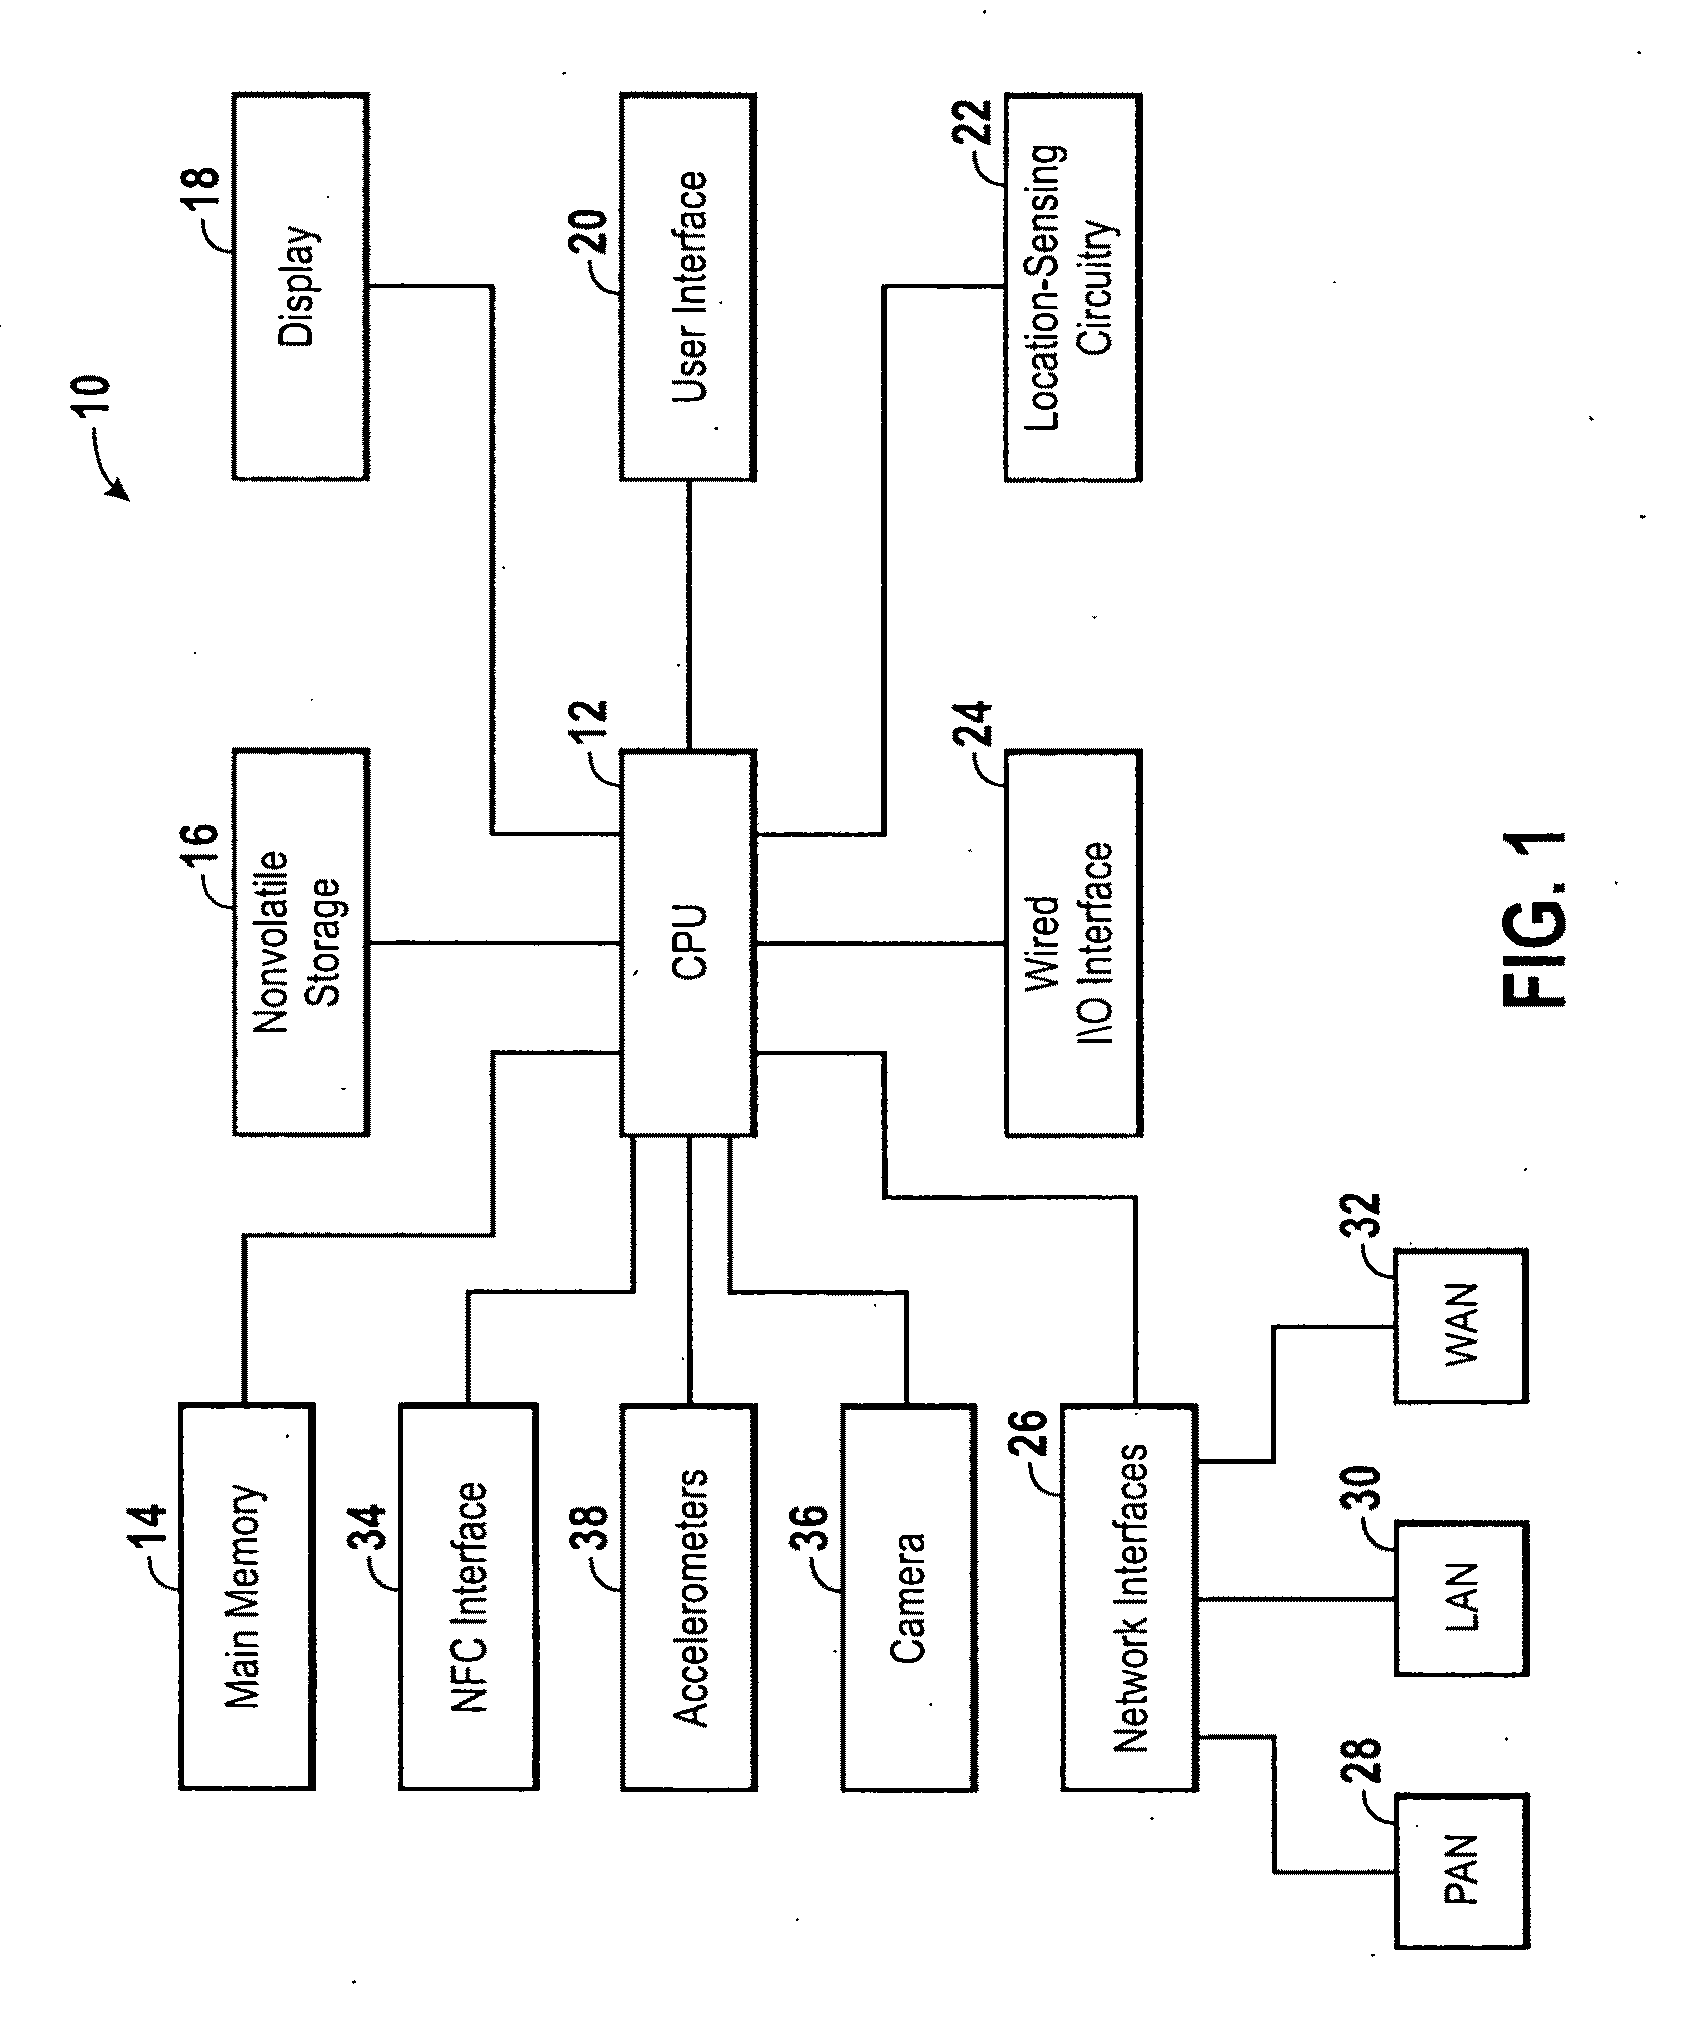 System and method for simplified control of electronic devices